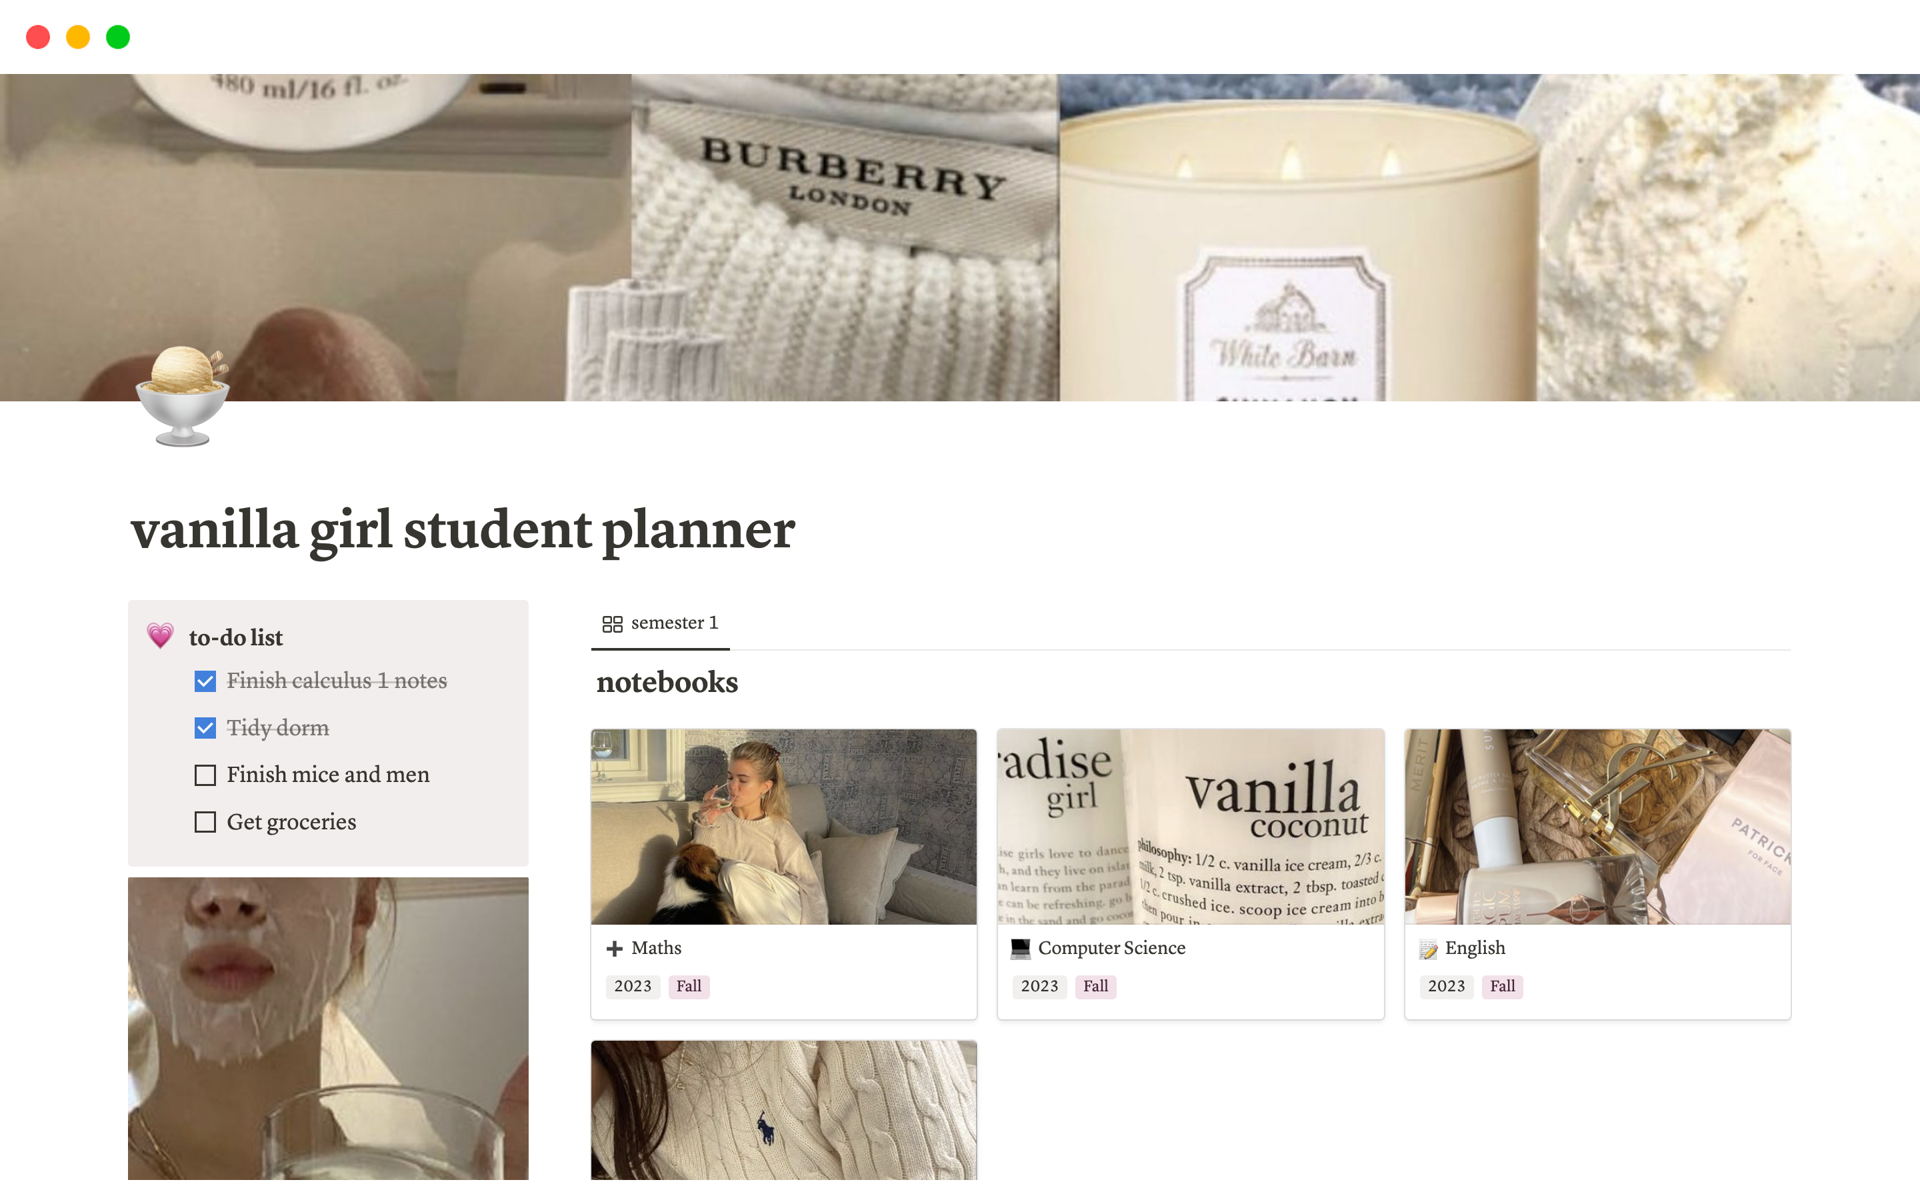 Organise your assignments, projects, clubs, and to-dos with an aesthetic vanilla girl themed Notion template for students.